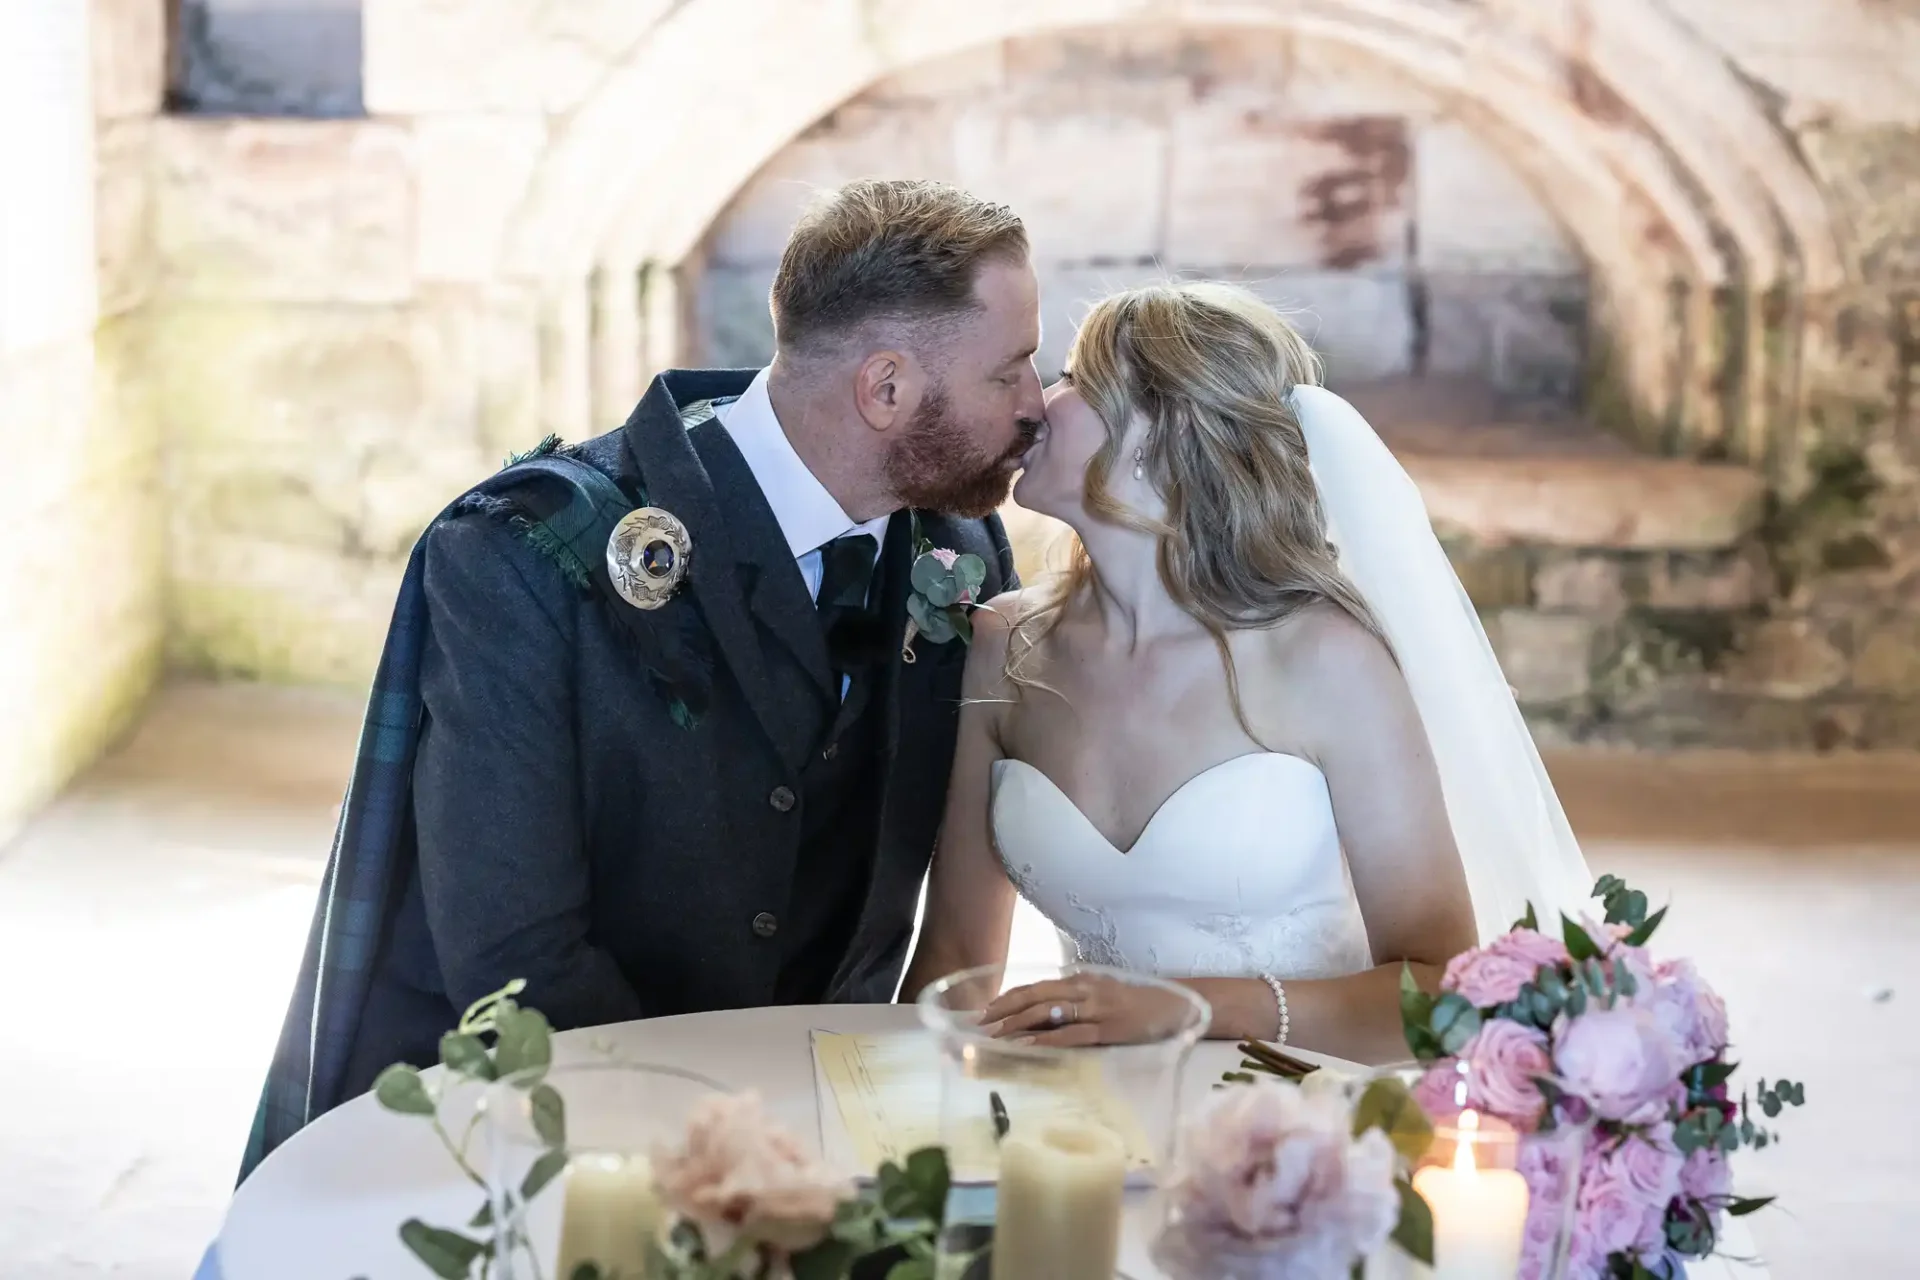 A bride and groom kiss across a table decorated with candles and flowers in a stone-arched venue.